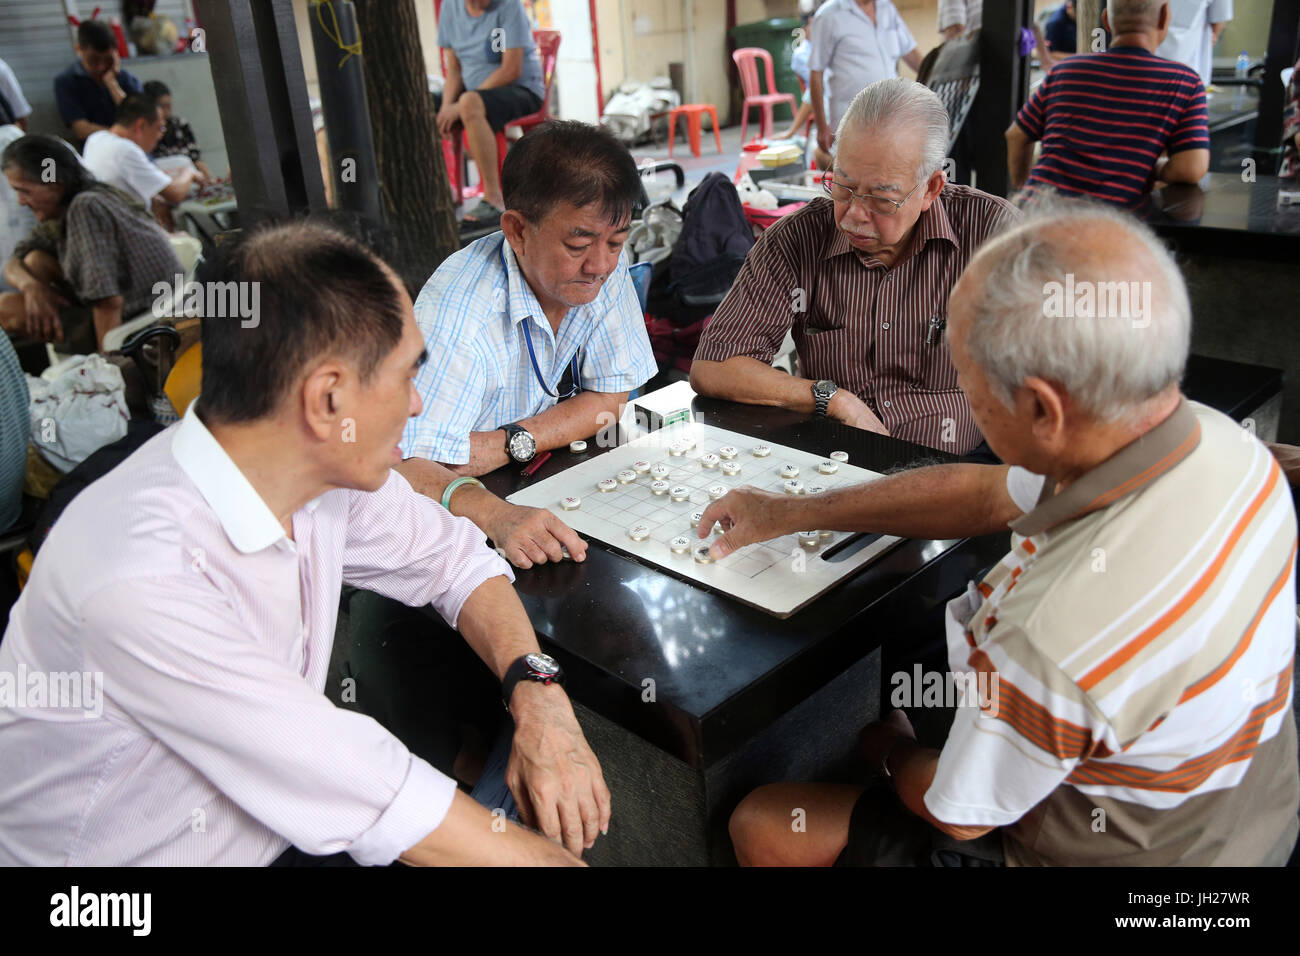 Groups of people congregate to play draughts and other board games on the streets of Chinatown.  Singapore. Stock Photo